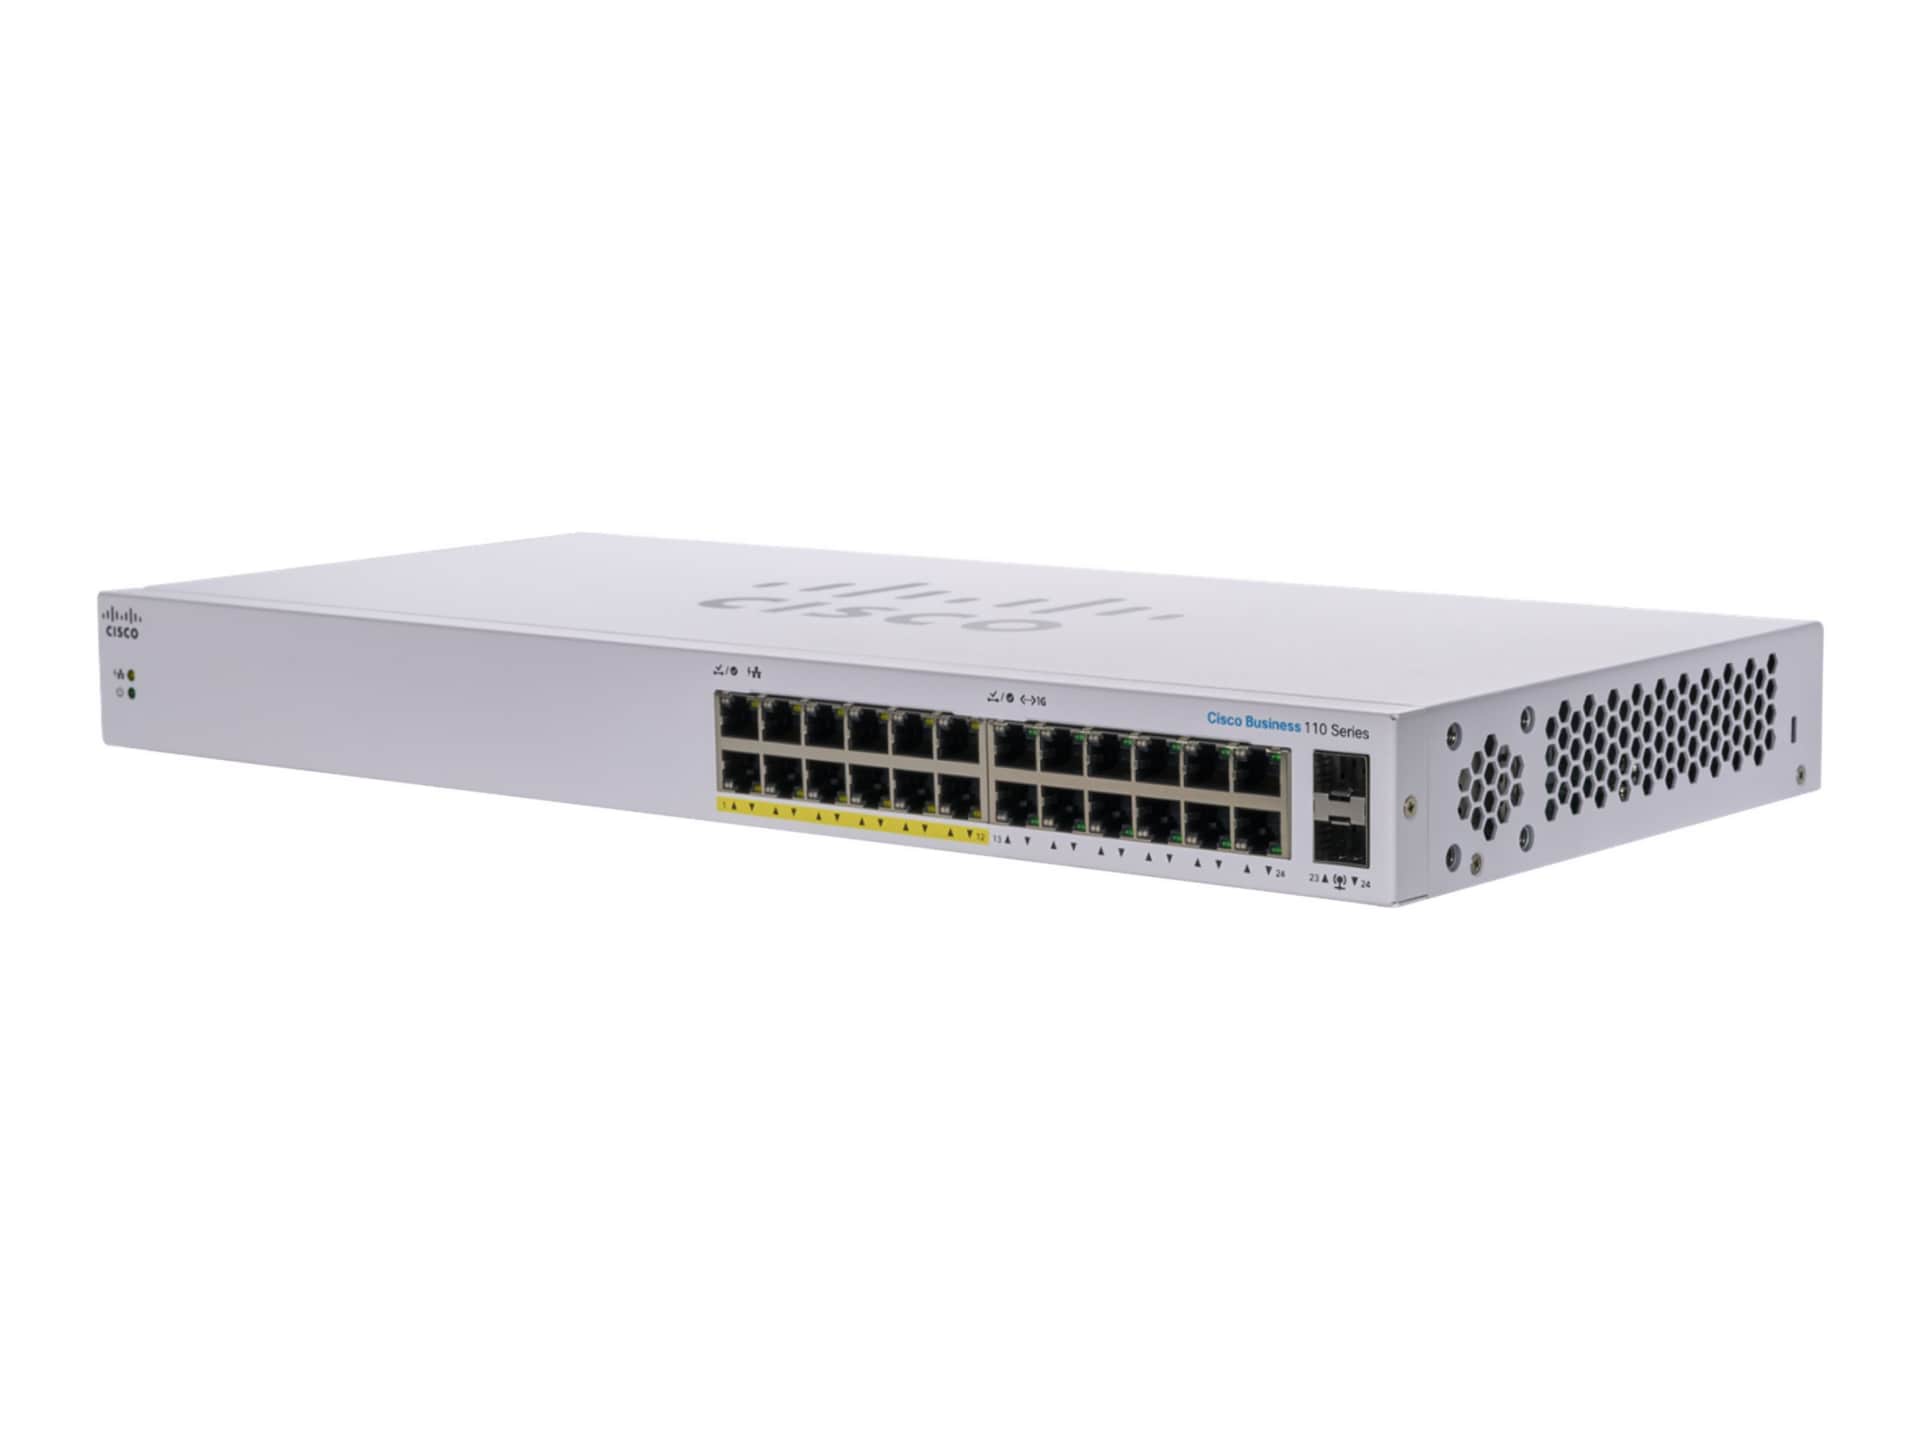 Cisco Business 110 Series 110-24PP - switch - 24 ports - unmanaged - rack-m